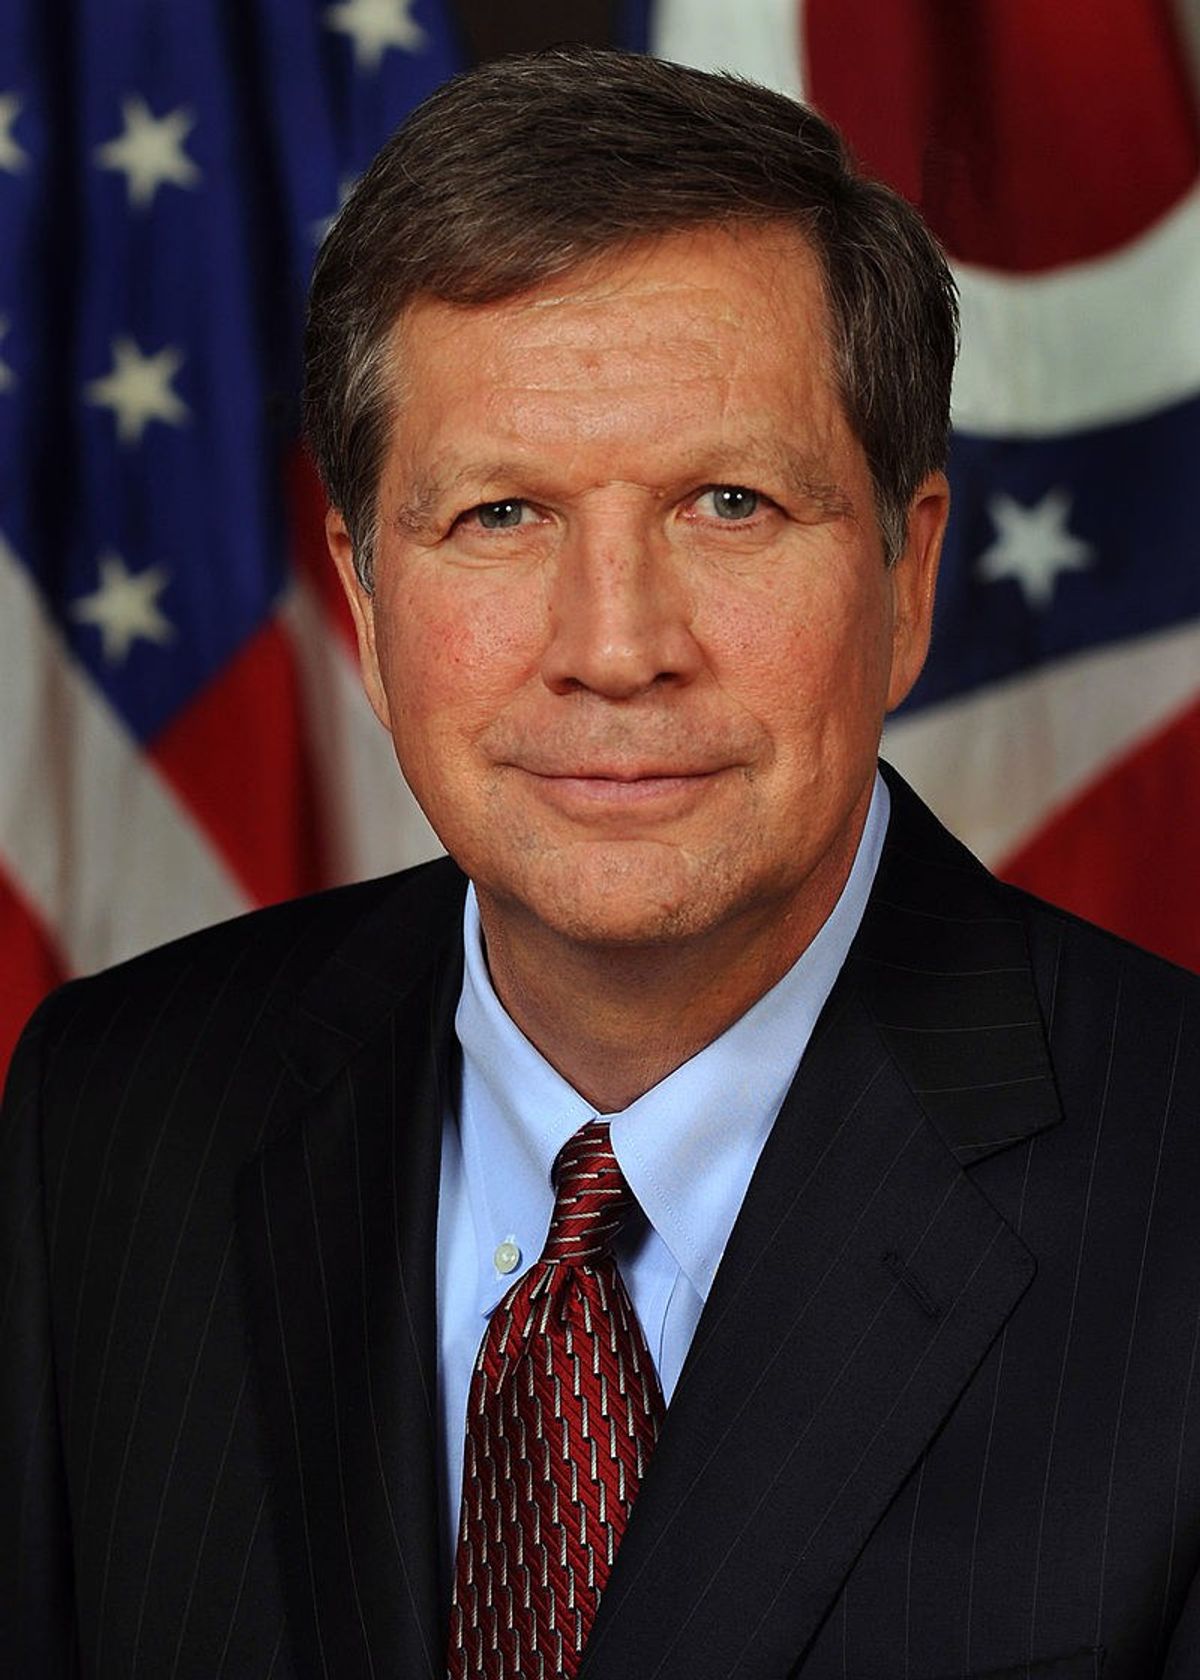 John Kasich May Be The Candidate America Is Looking For